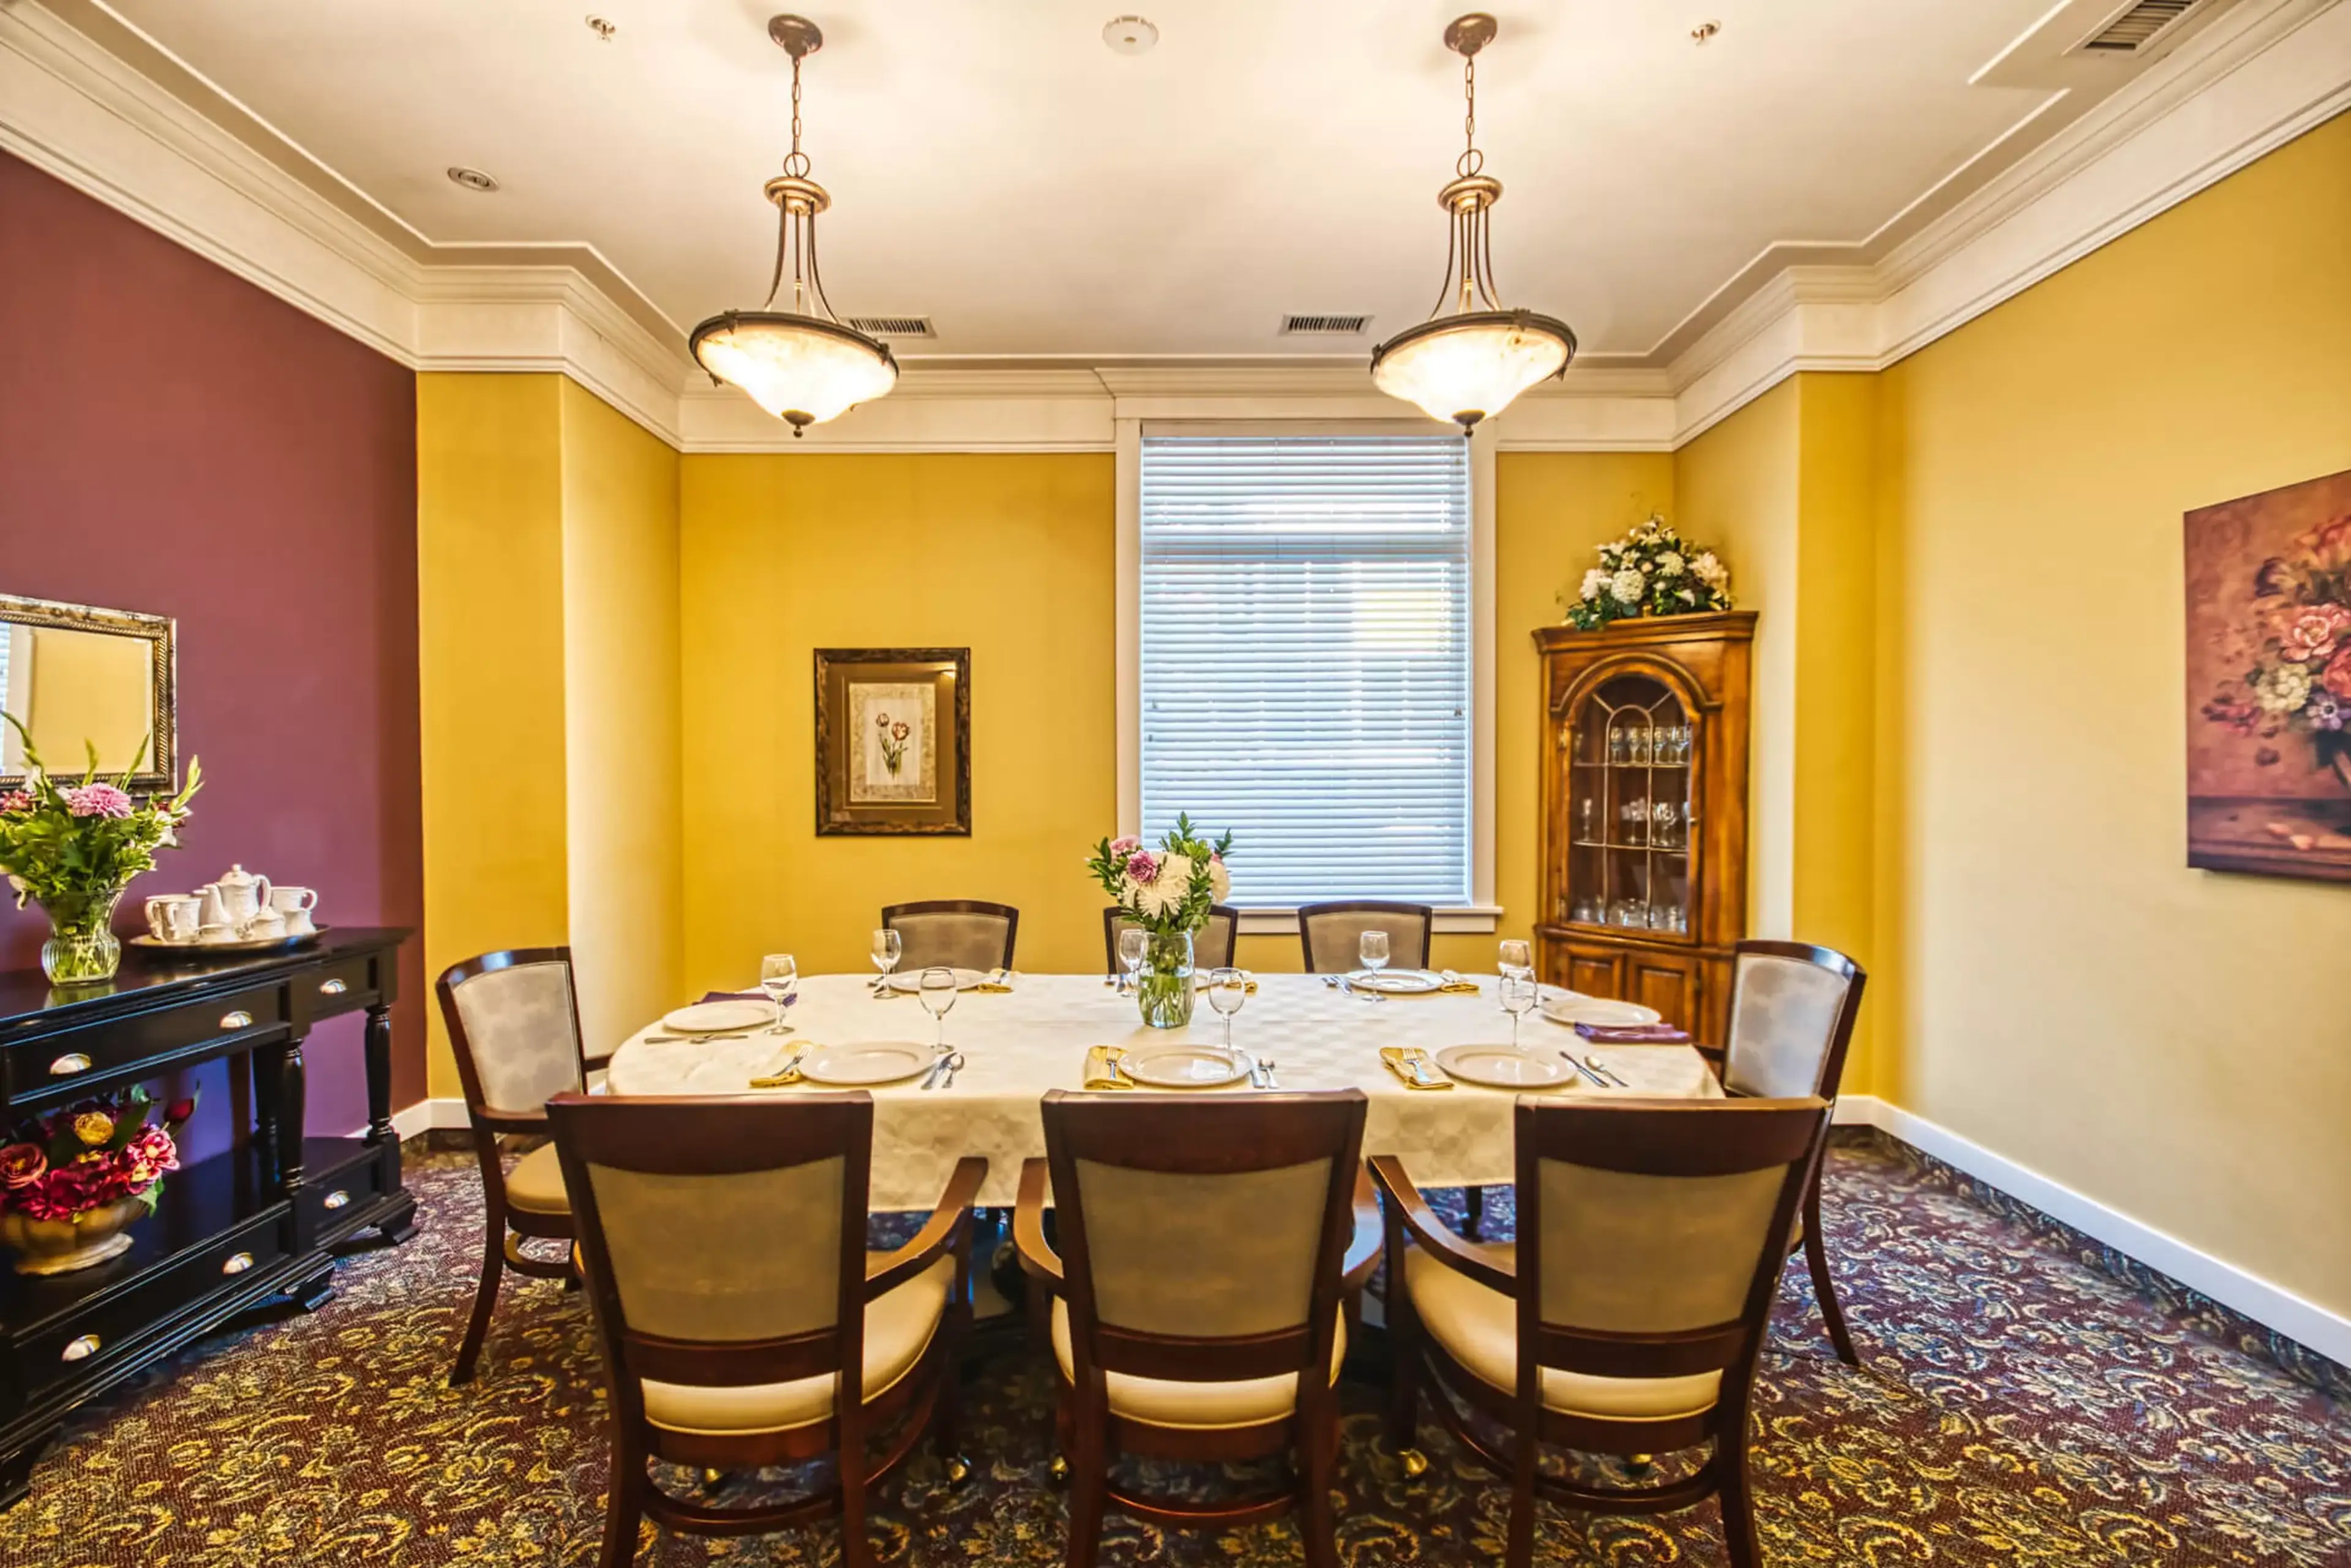 Renaissance Private Dining Room